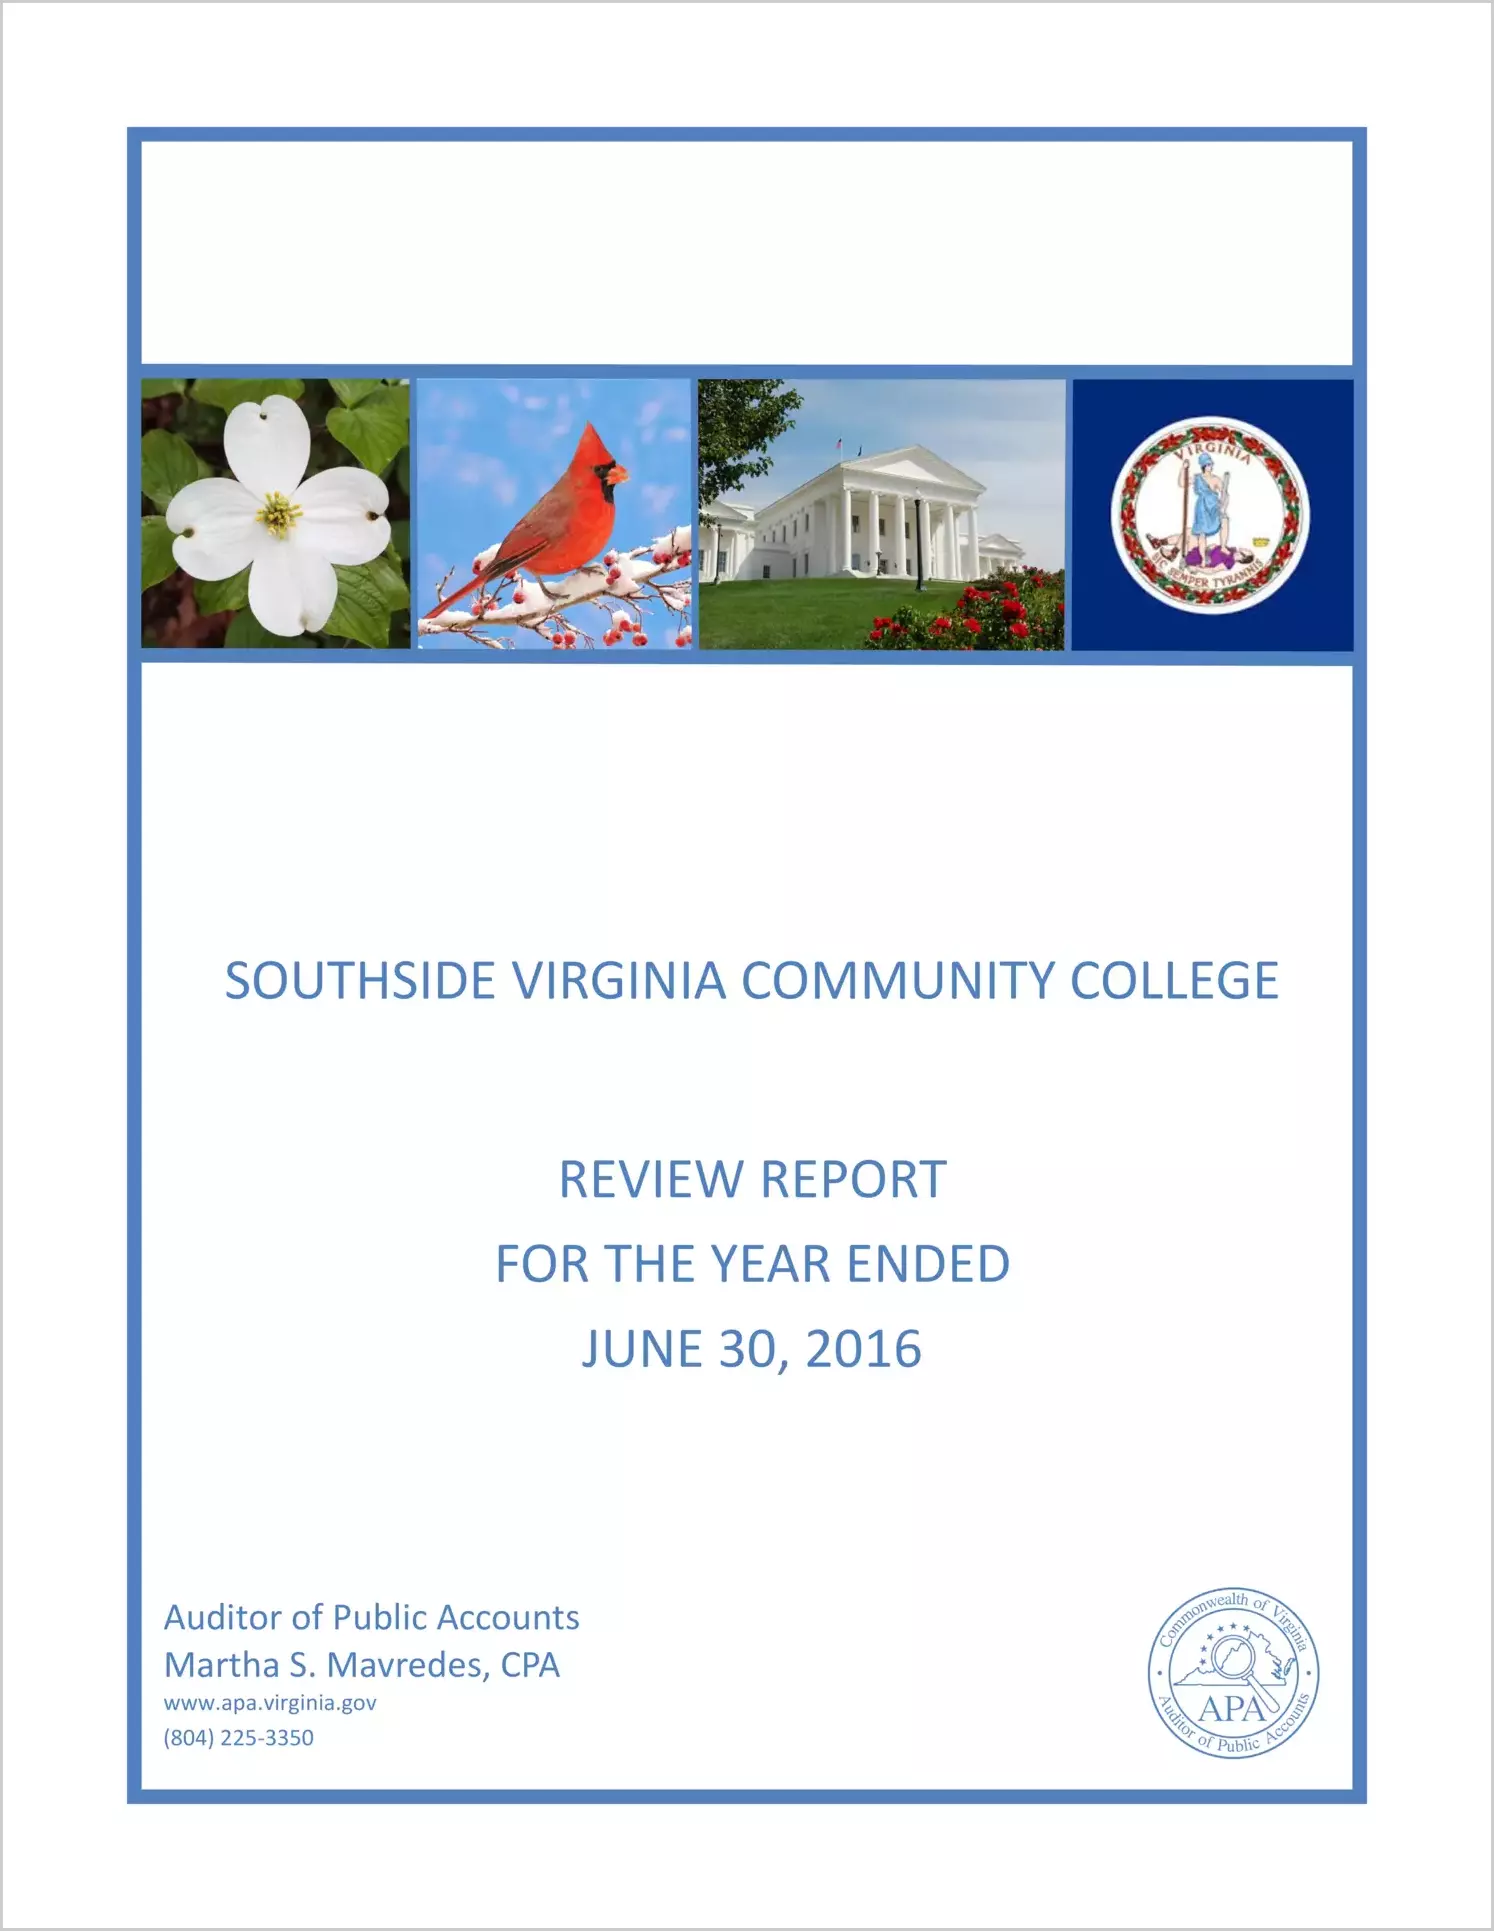 Southside Virginia Community College Review Report for the year ended June 30, 2016